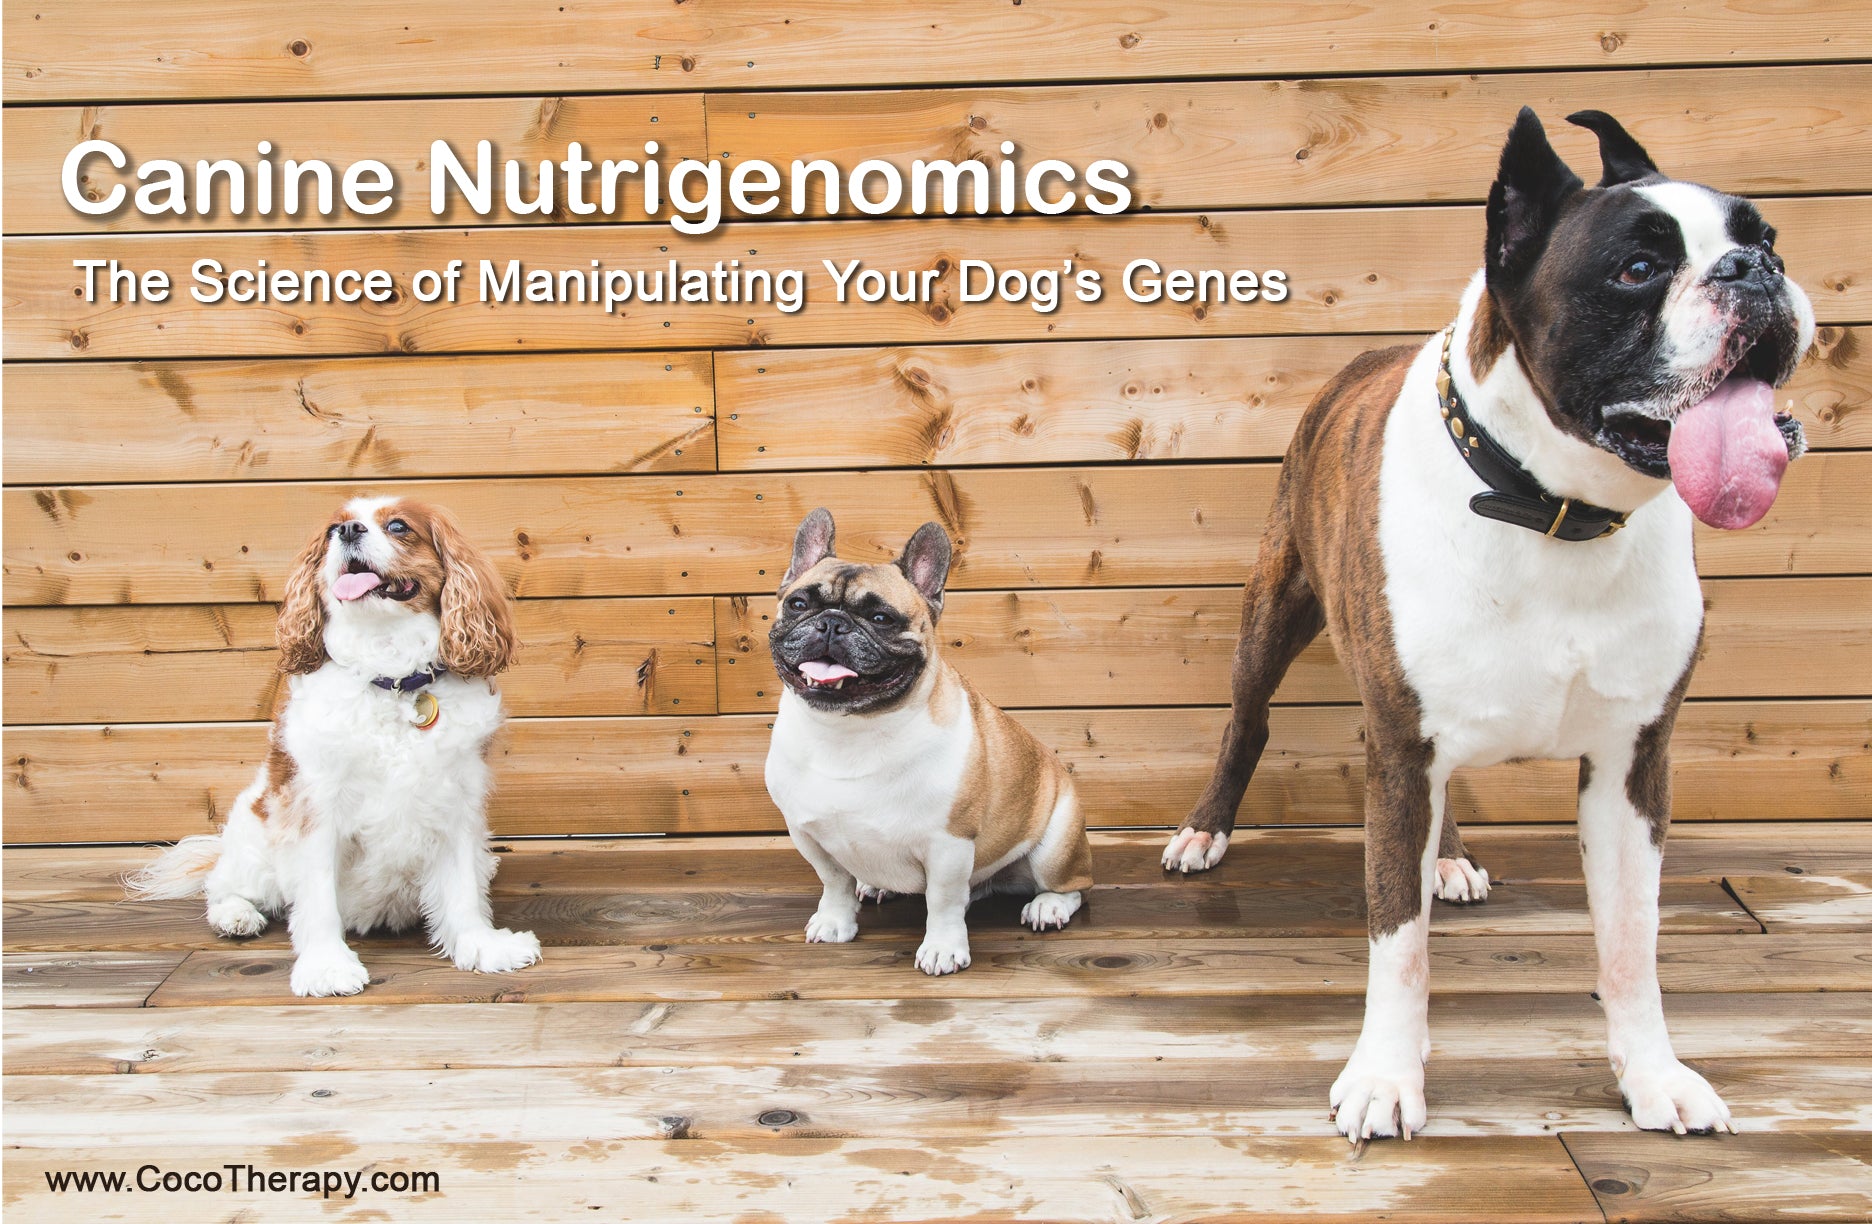 Canine Nutrigenomics: Can You Manipulate Your Dog’s Genes?